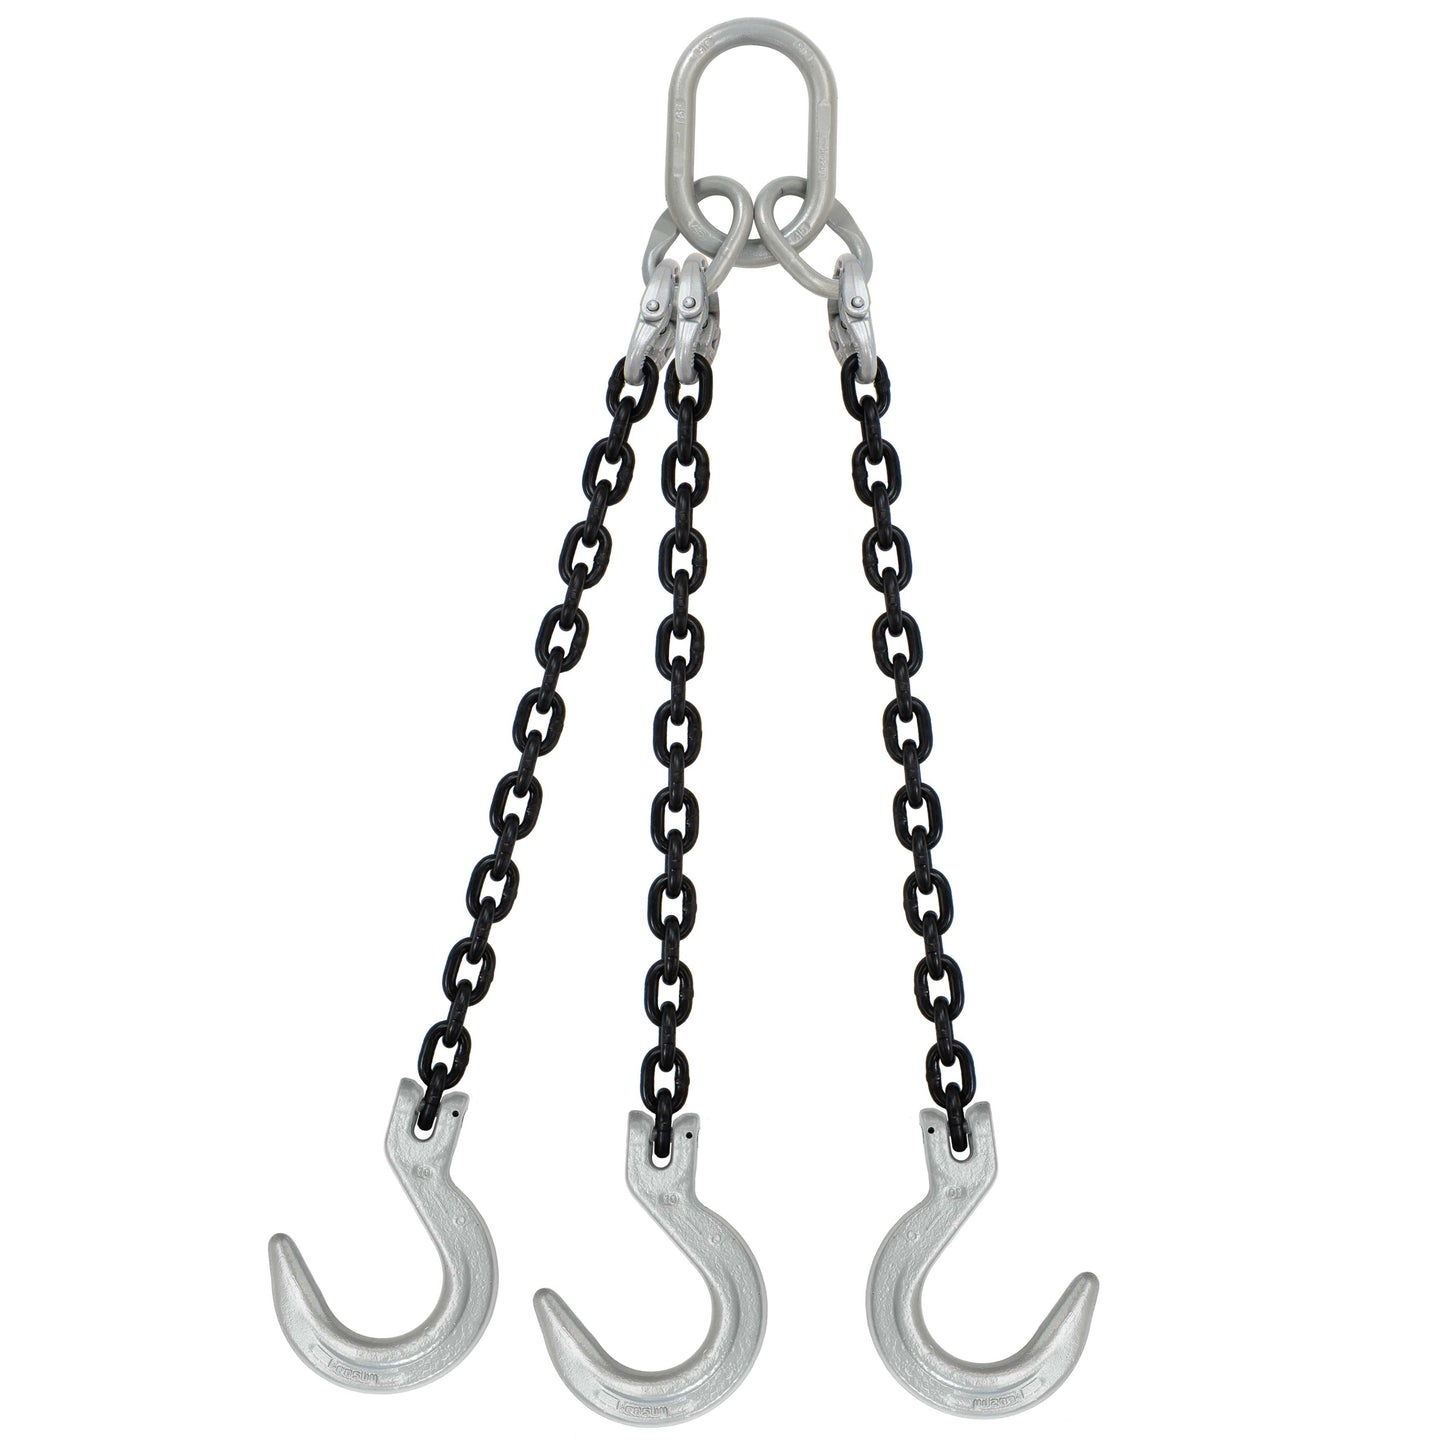 12 inch x 12 foot Domestic 3 Leg Chain Sling w Crosby Foundry Hooks Grade 100 image 1 of 2